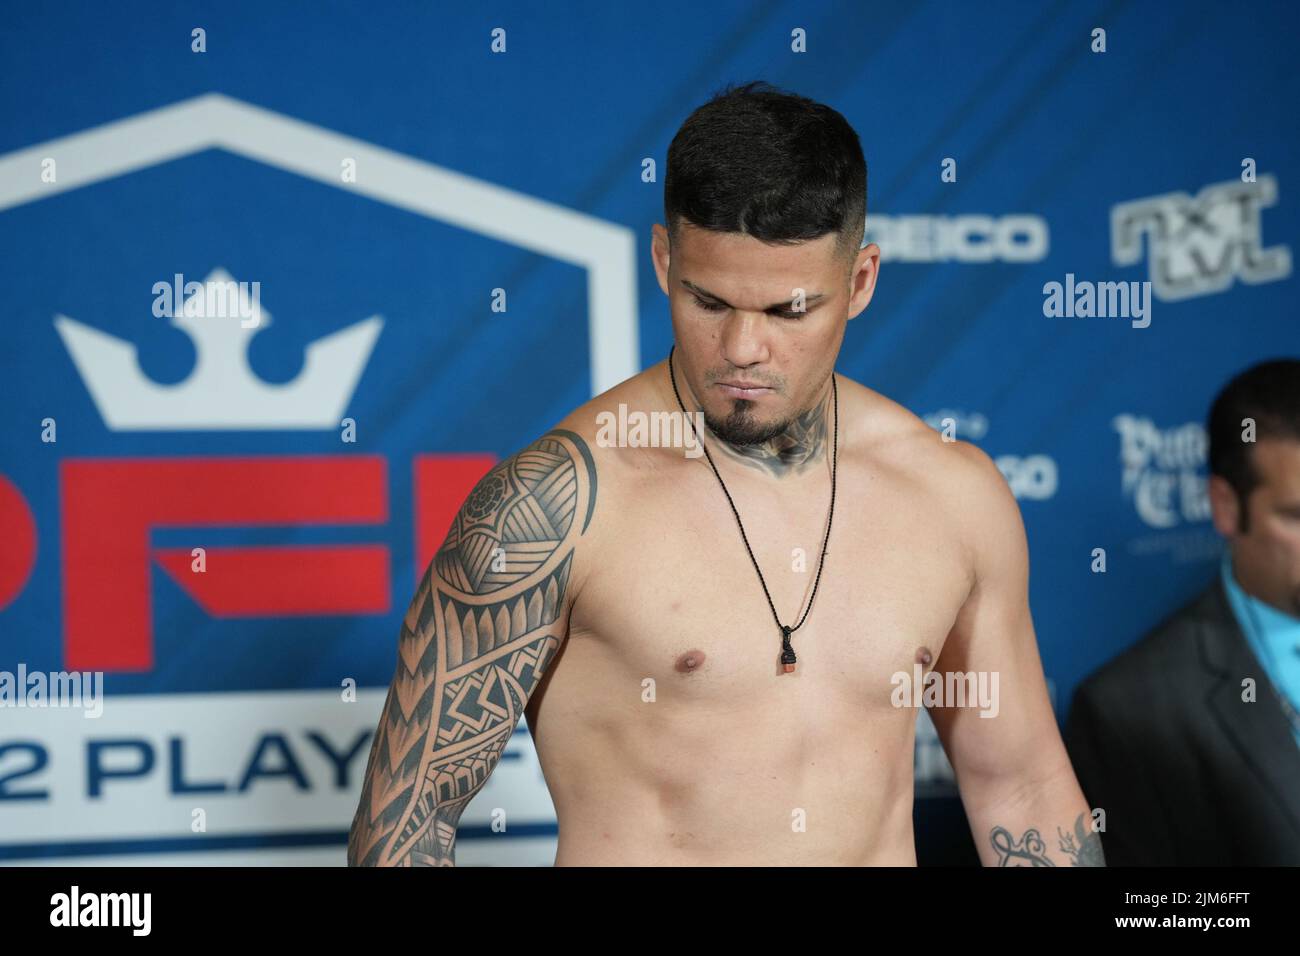 NEW YORK CITY, NY - August 4: Delan Monte steps on the scale for the official weigh-ins at The New Yorker Hotel for 2022 PFL Playoffs Semi-Finals : Official Weigh-ins on August 4, 2022 in New York City, NY, United States. (Photo by Louis Grasse/PxImages) Stock Photo